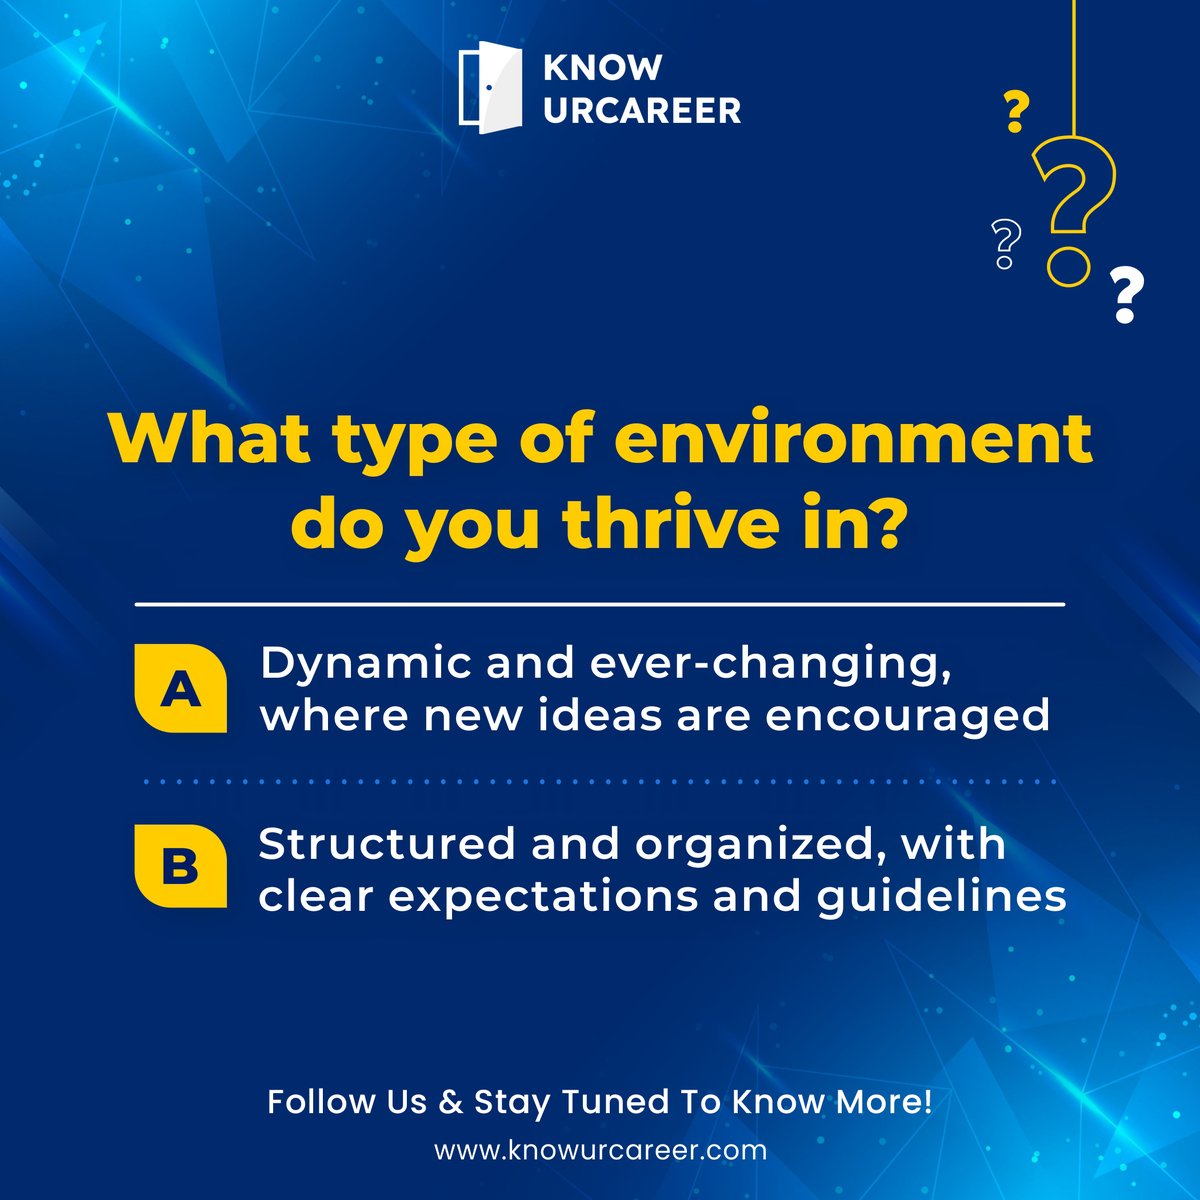 👉🏻 Tell us your response in the comments.

❇️Follow us and stay tuned for the next updates!

#DynamicInnovator #StructuredStrategist #AdaptiveThinker #OrganizedExecutor #InnovationCulture #KnowUrCareer